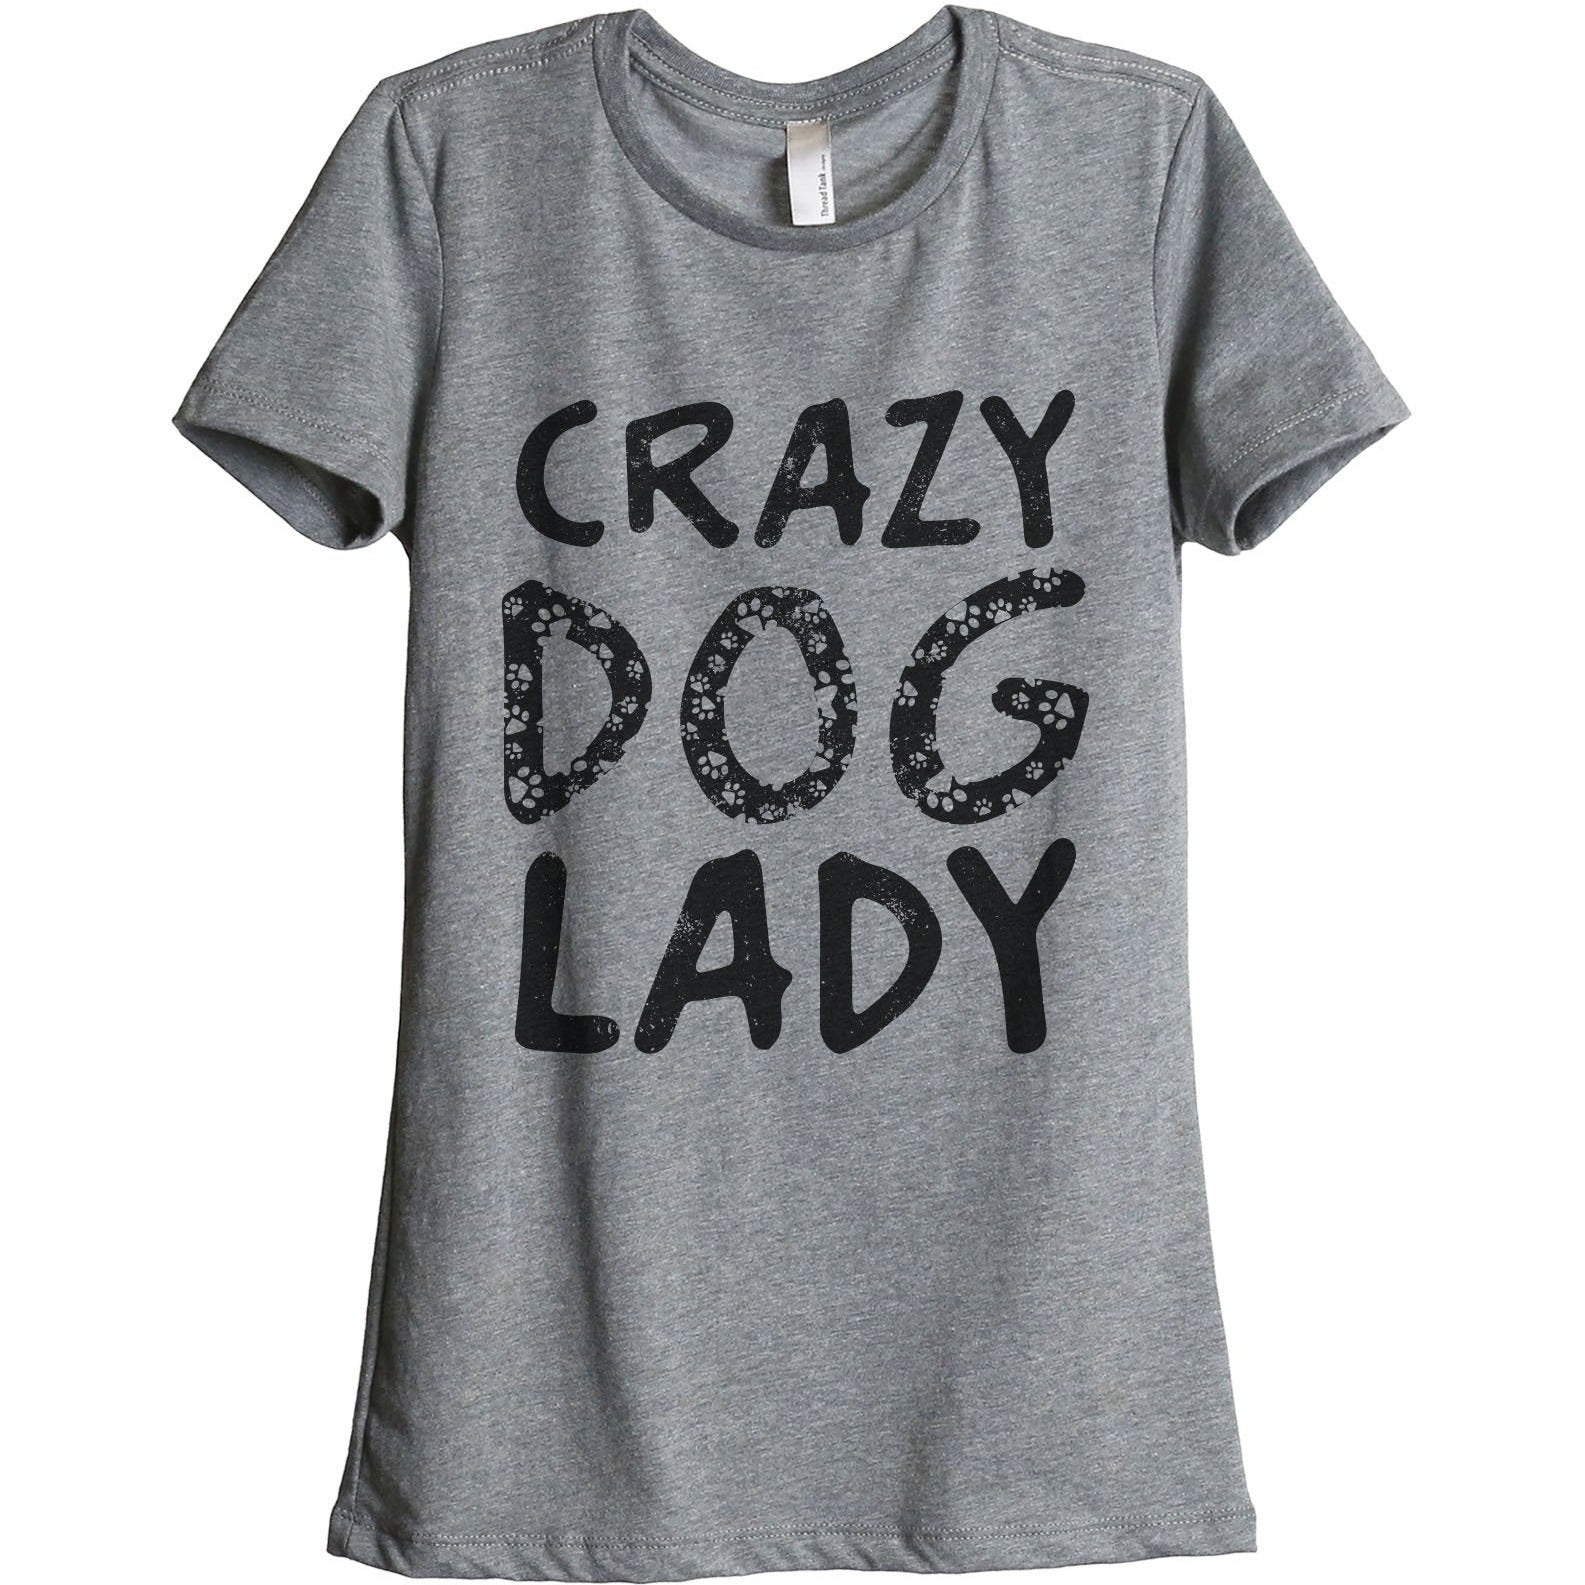 Crazy Dog Lady - Thread Tank | Stories You Can Wear | T-Shirts, Tank Tops and Sweatshirts